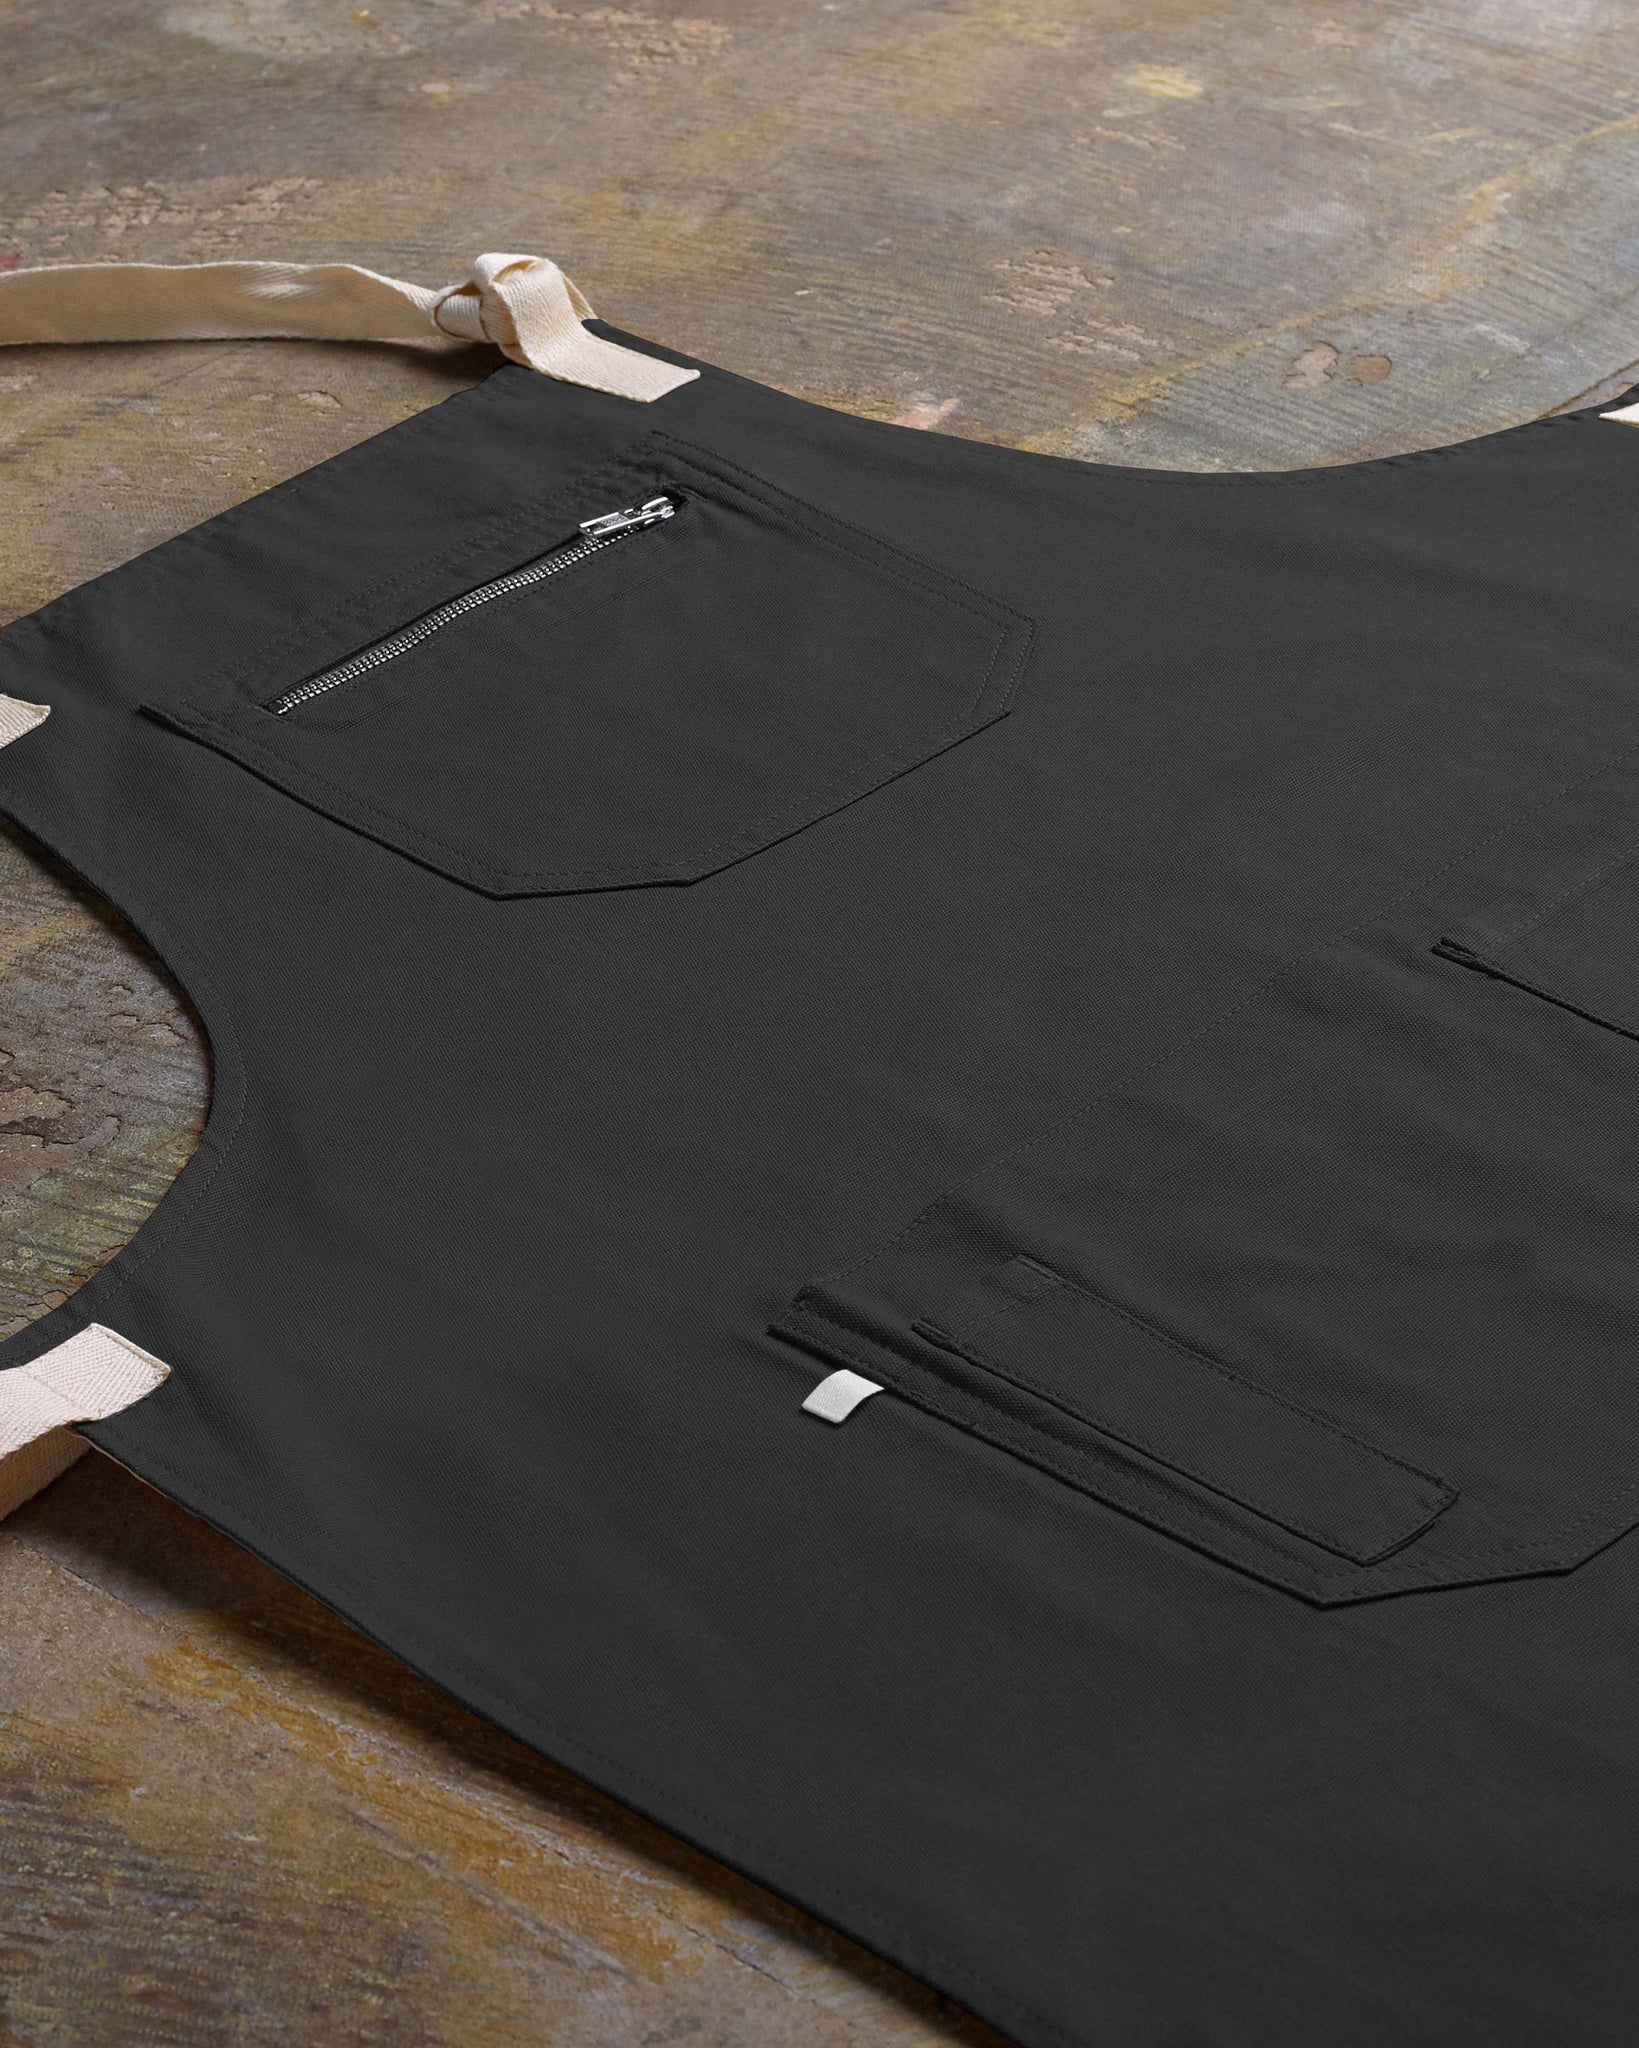 Angled flat view of faded black #9004 carpenter apron by Uskees. Showing pen, phone and pouch pockets and clearer view of organic cotton fabric texture.